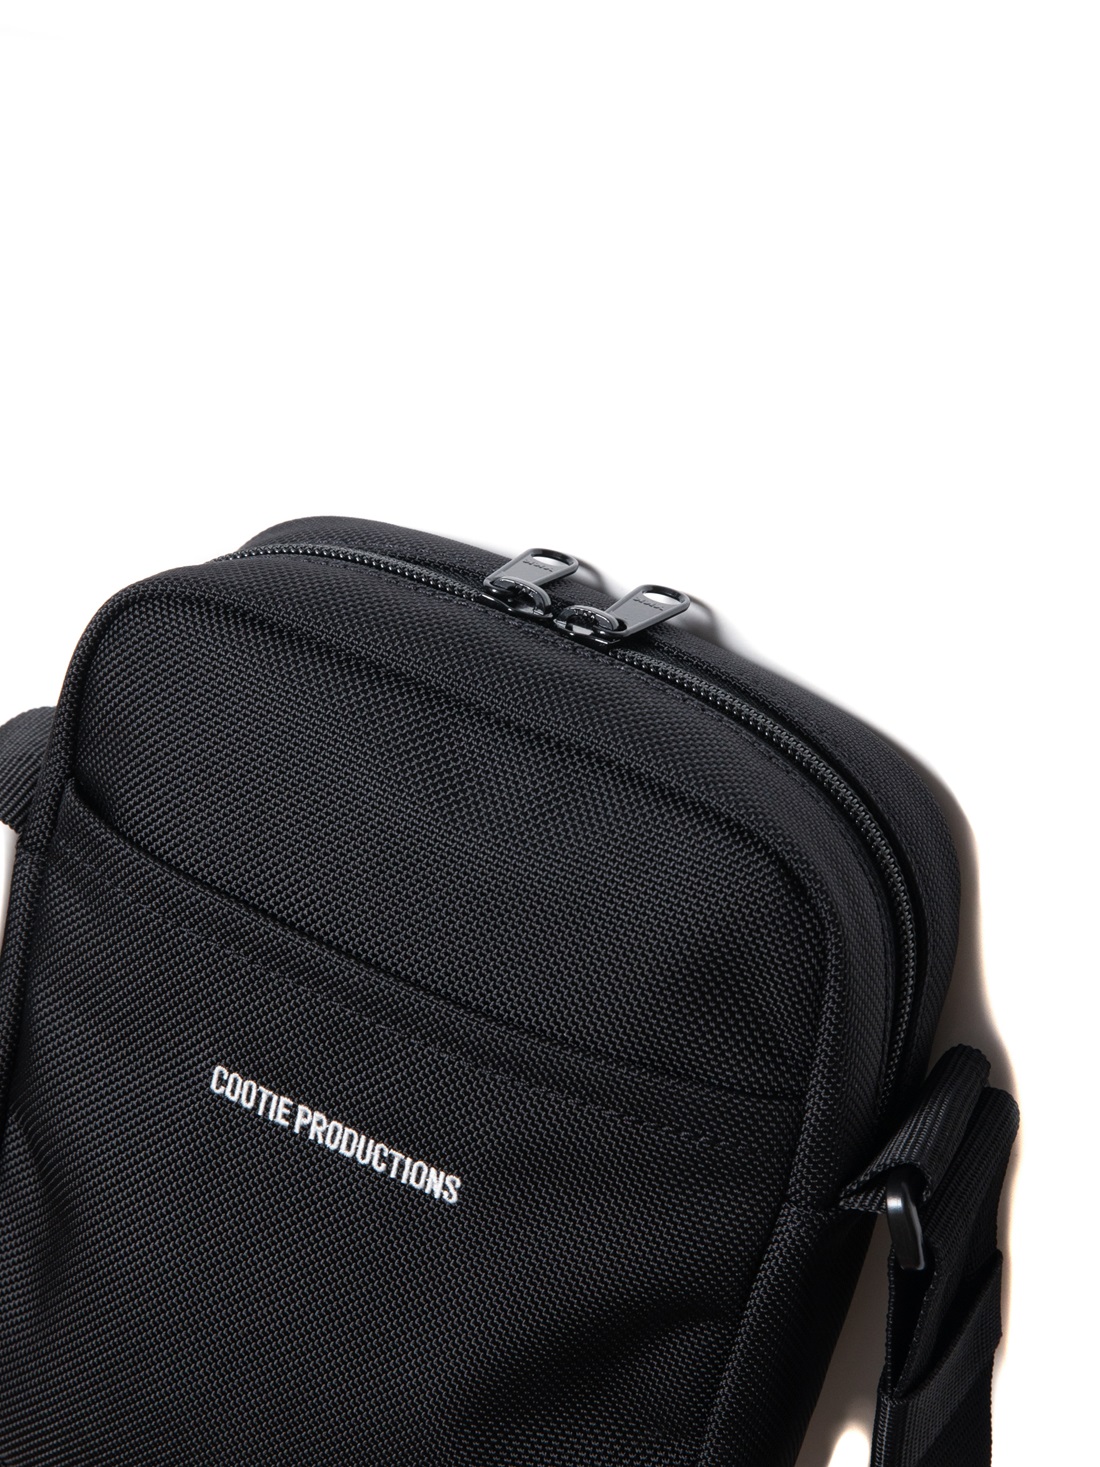 COOTIE PRODUCTIONS/Compact Shoulder Bag（Black）［コンパクト 